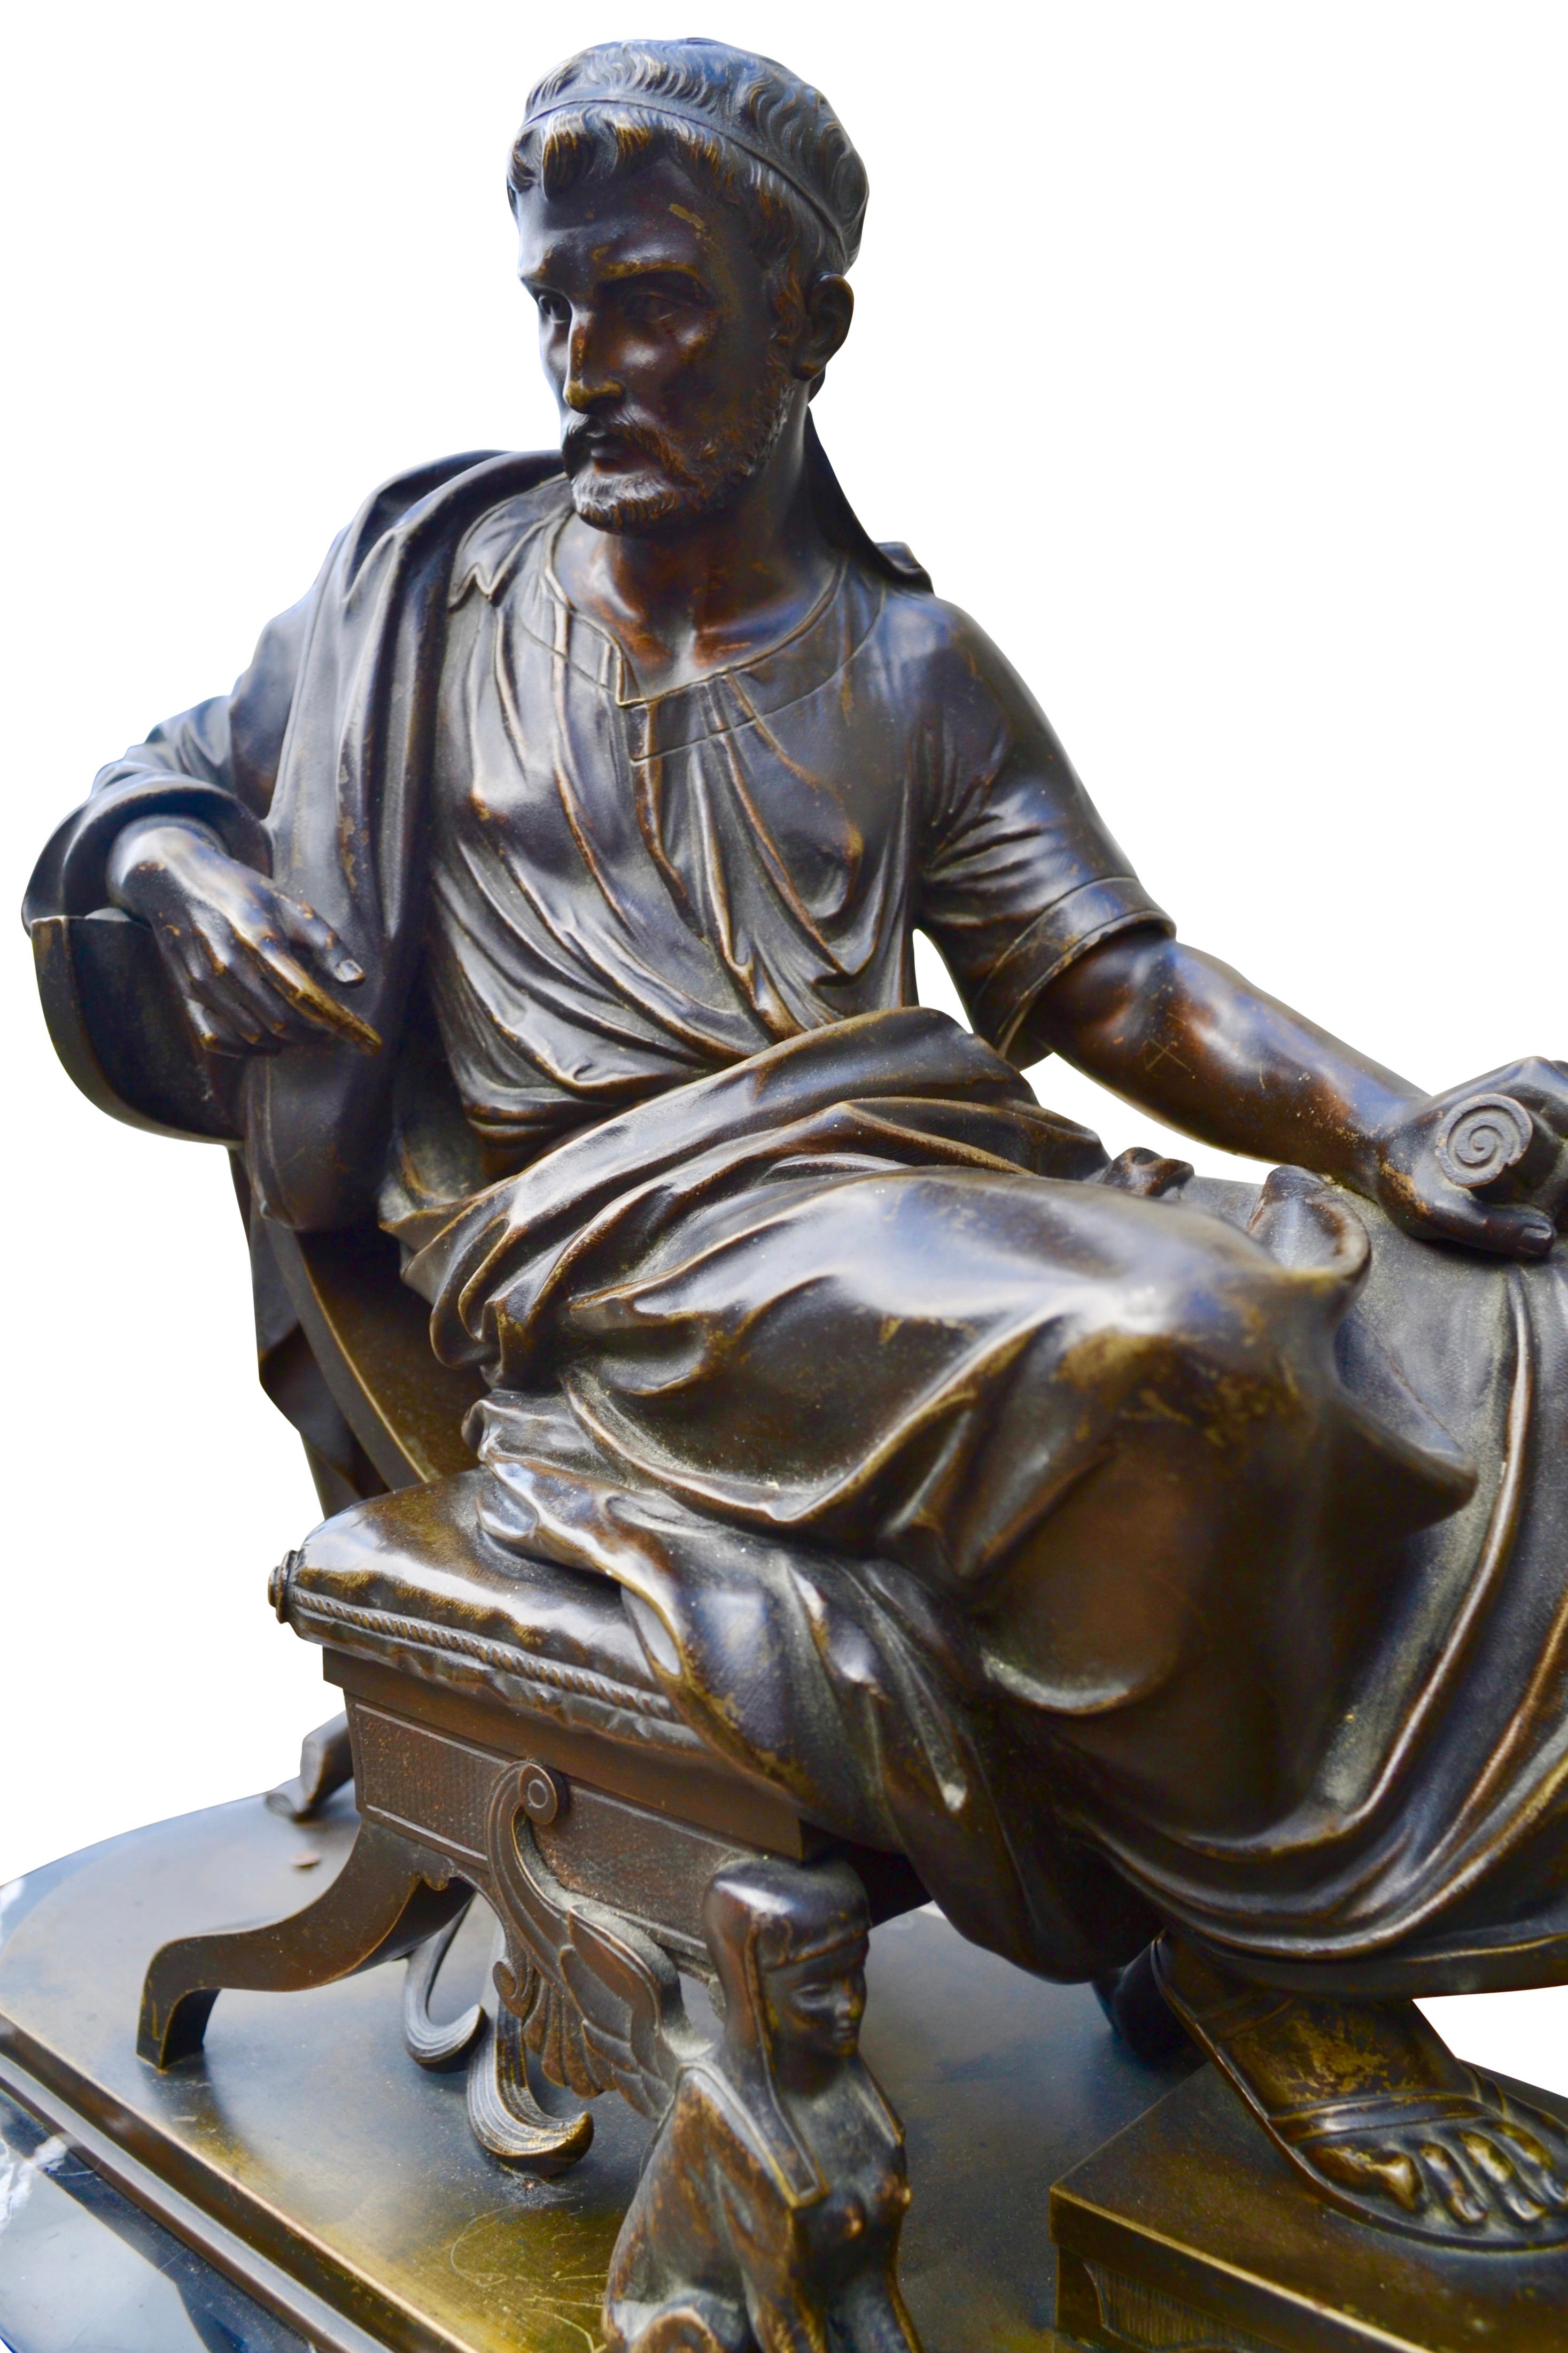 The bronze statue features a Greek or Roman philosoper sitting/leaning back on his klismos chair which has two winged griphons as front leg supports. He is fully draped in his toga, his right arm is relaxed and held over the back of his chair, his